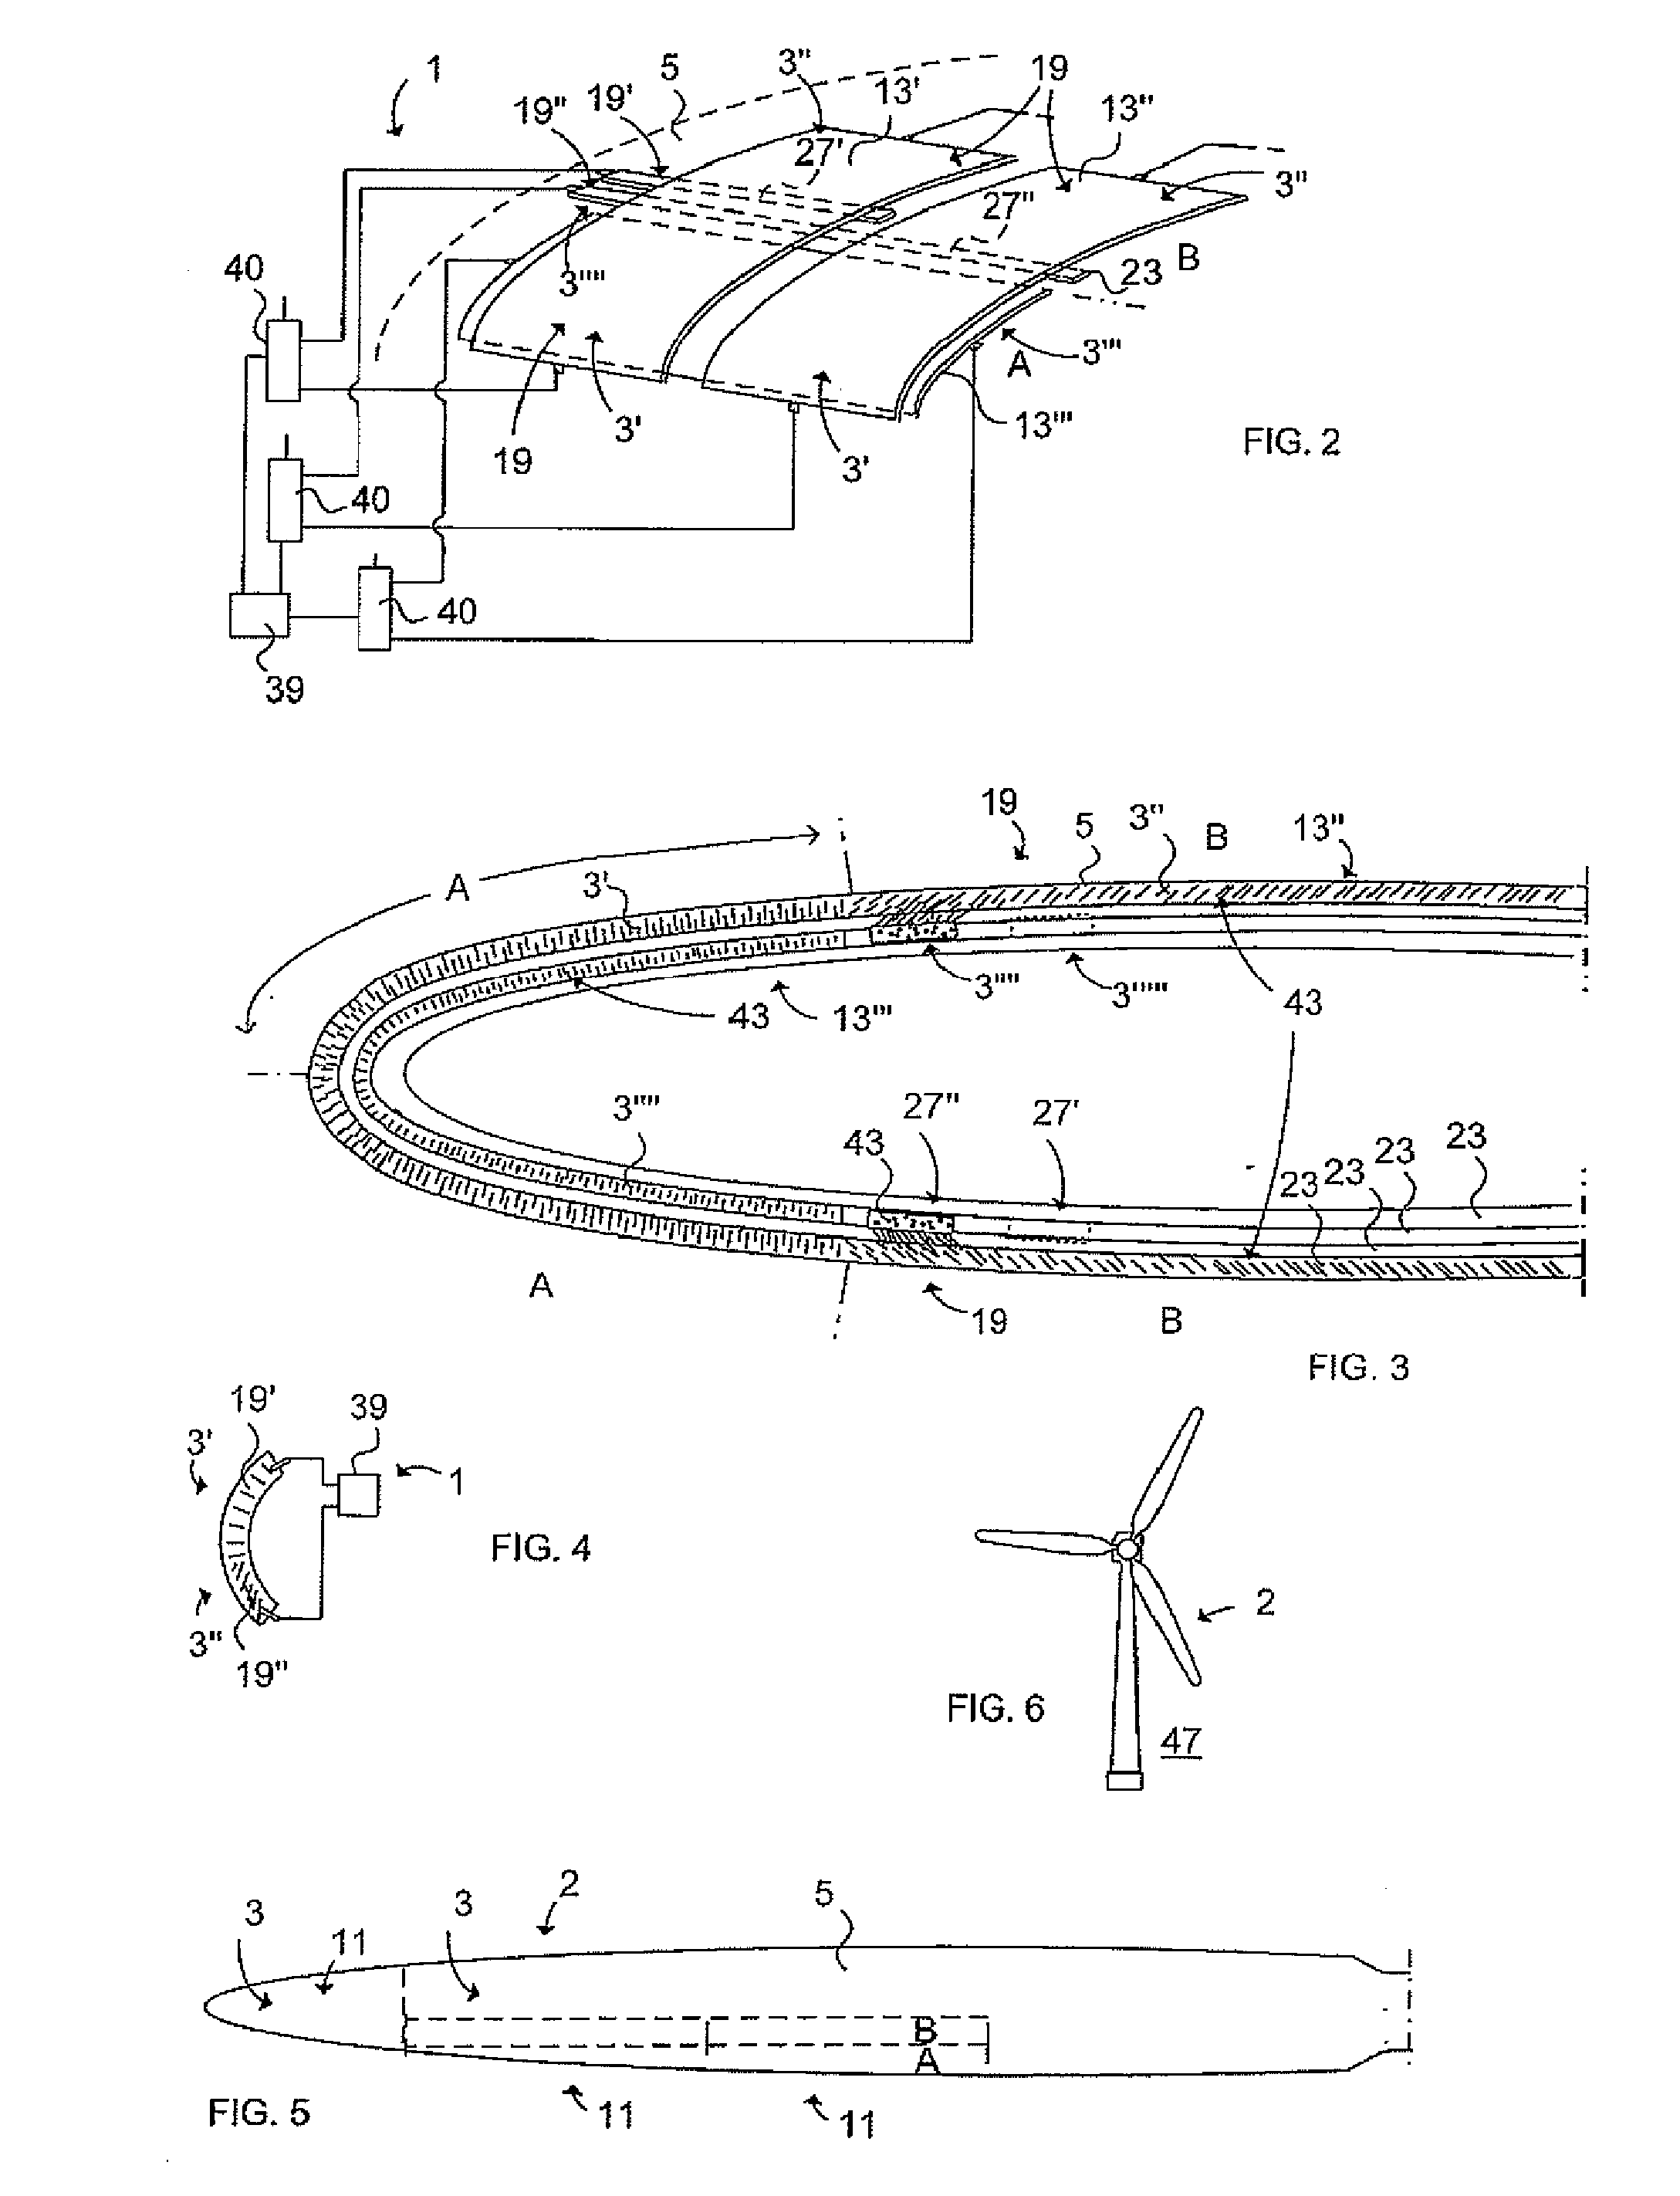 Multifunctional de-icing/Anti-icing system of a wind turbine